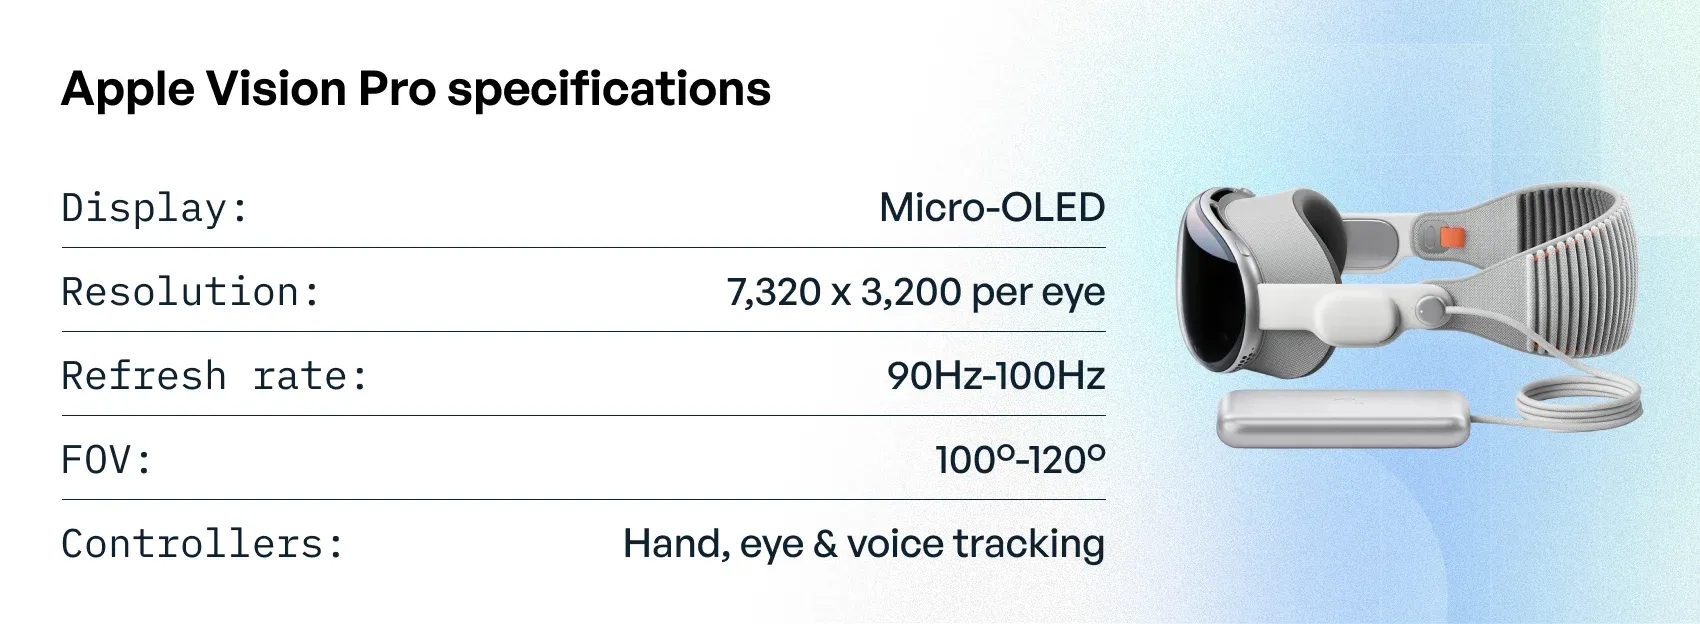 Apple Vision Pro specifications